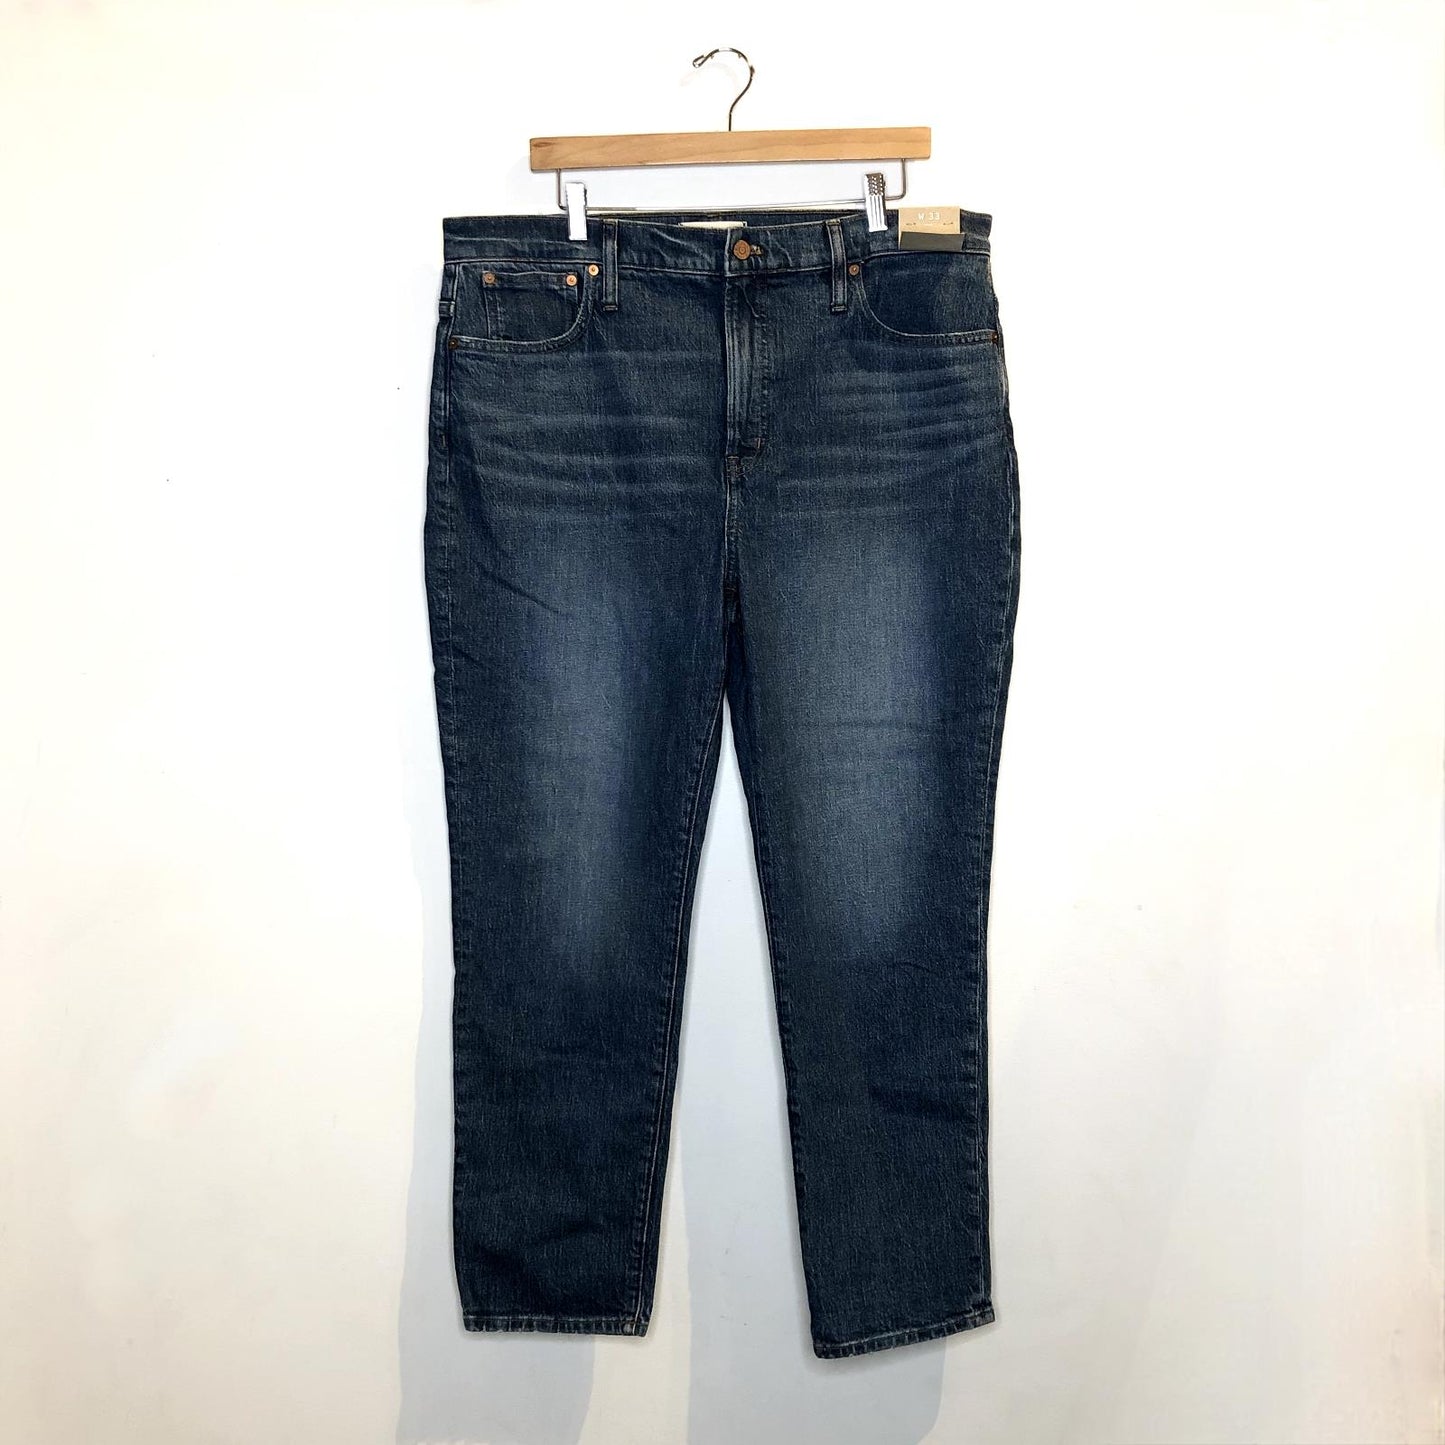 33 - Madewell NEW $128 The Perfect Vintage Jeans Womens 0530JF